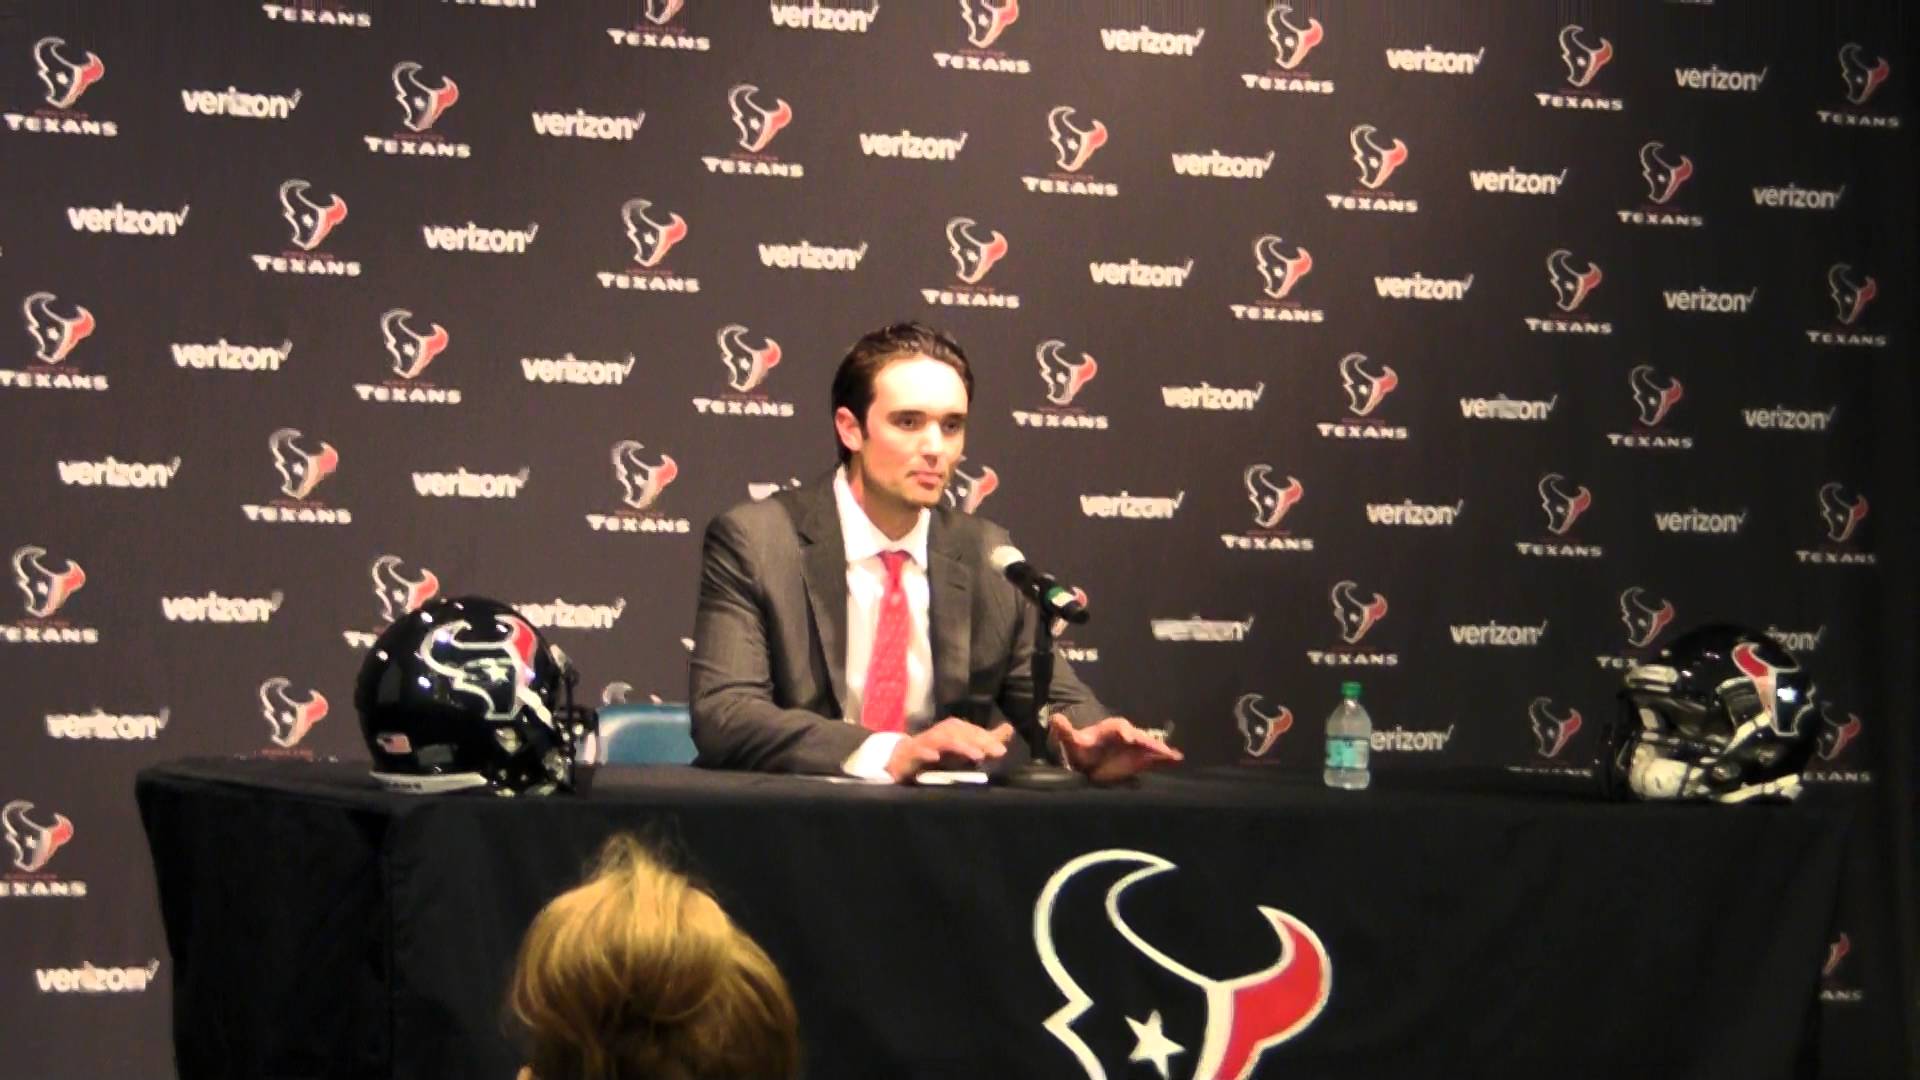 Brock Osweiler introduced by the Houston Texans